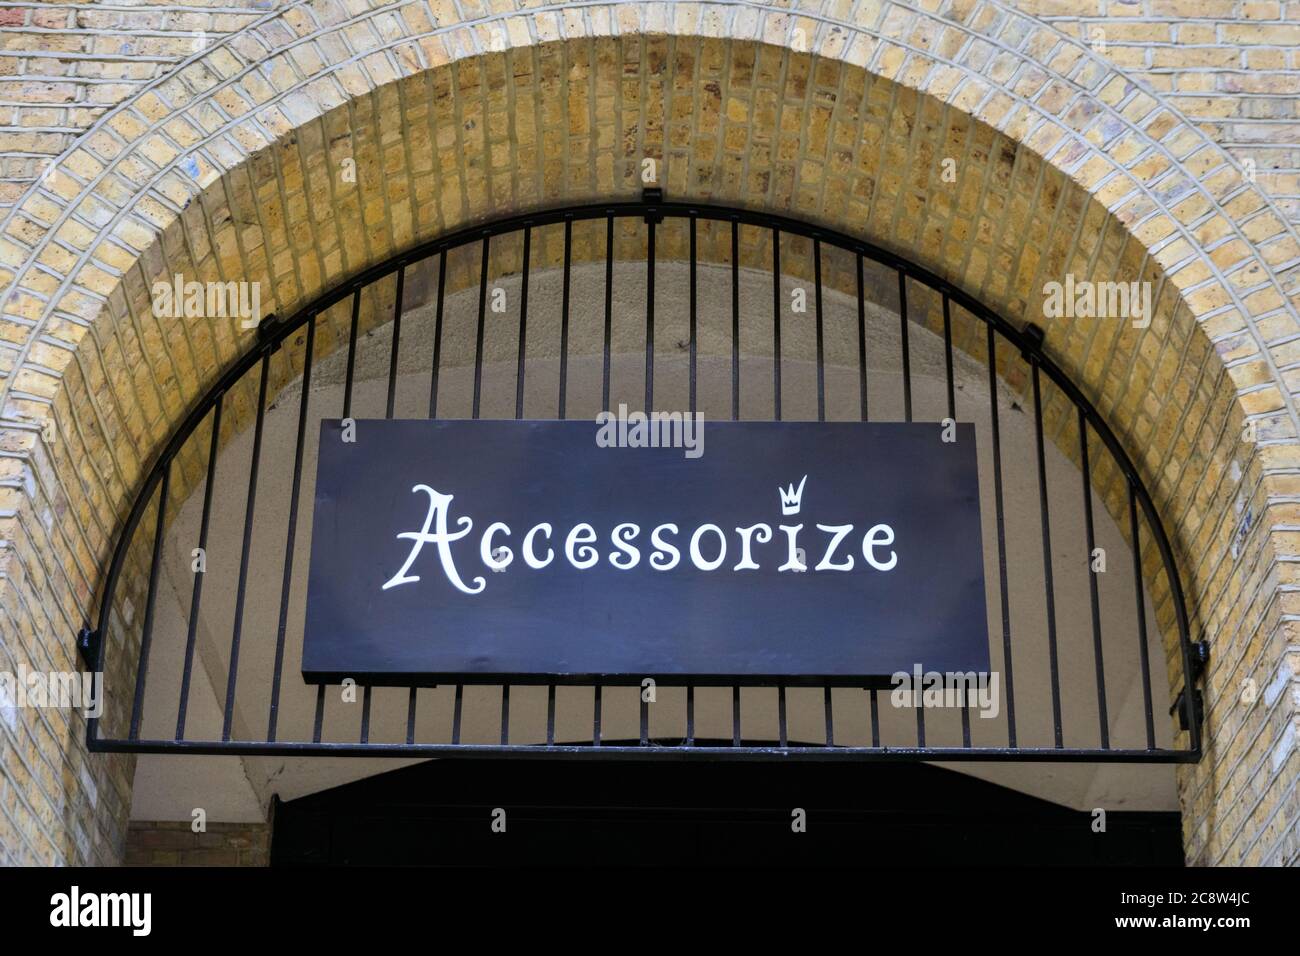 Accessorize shop chain exterior and branding sign, branch in London, England, UK Stock Photo